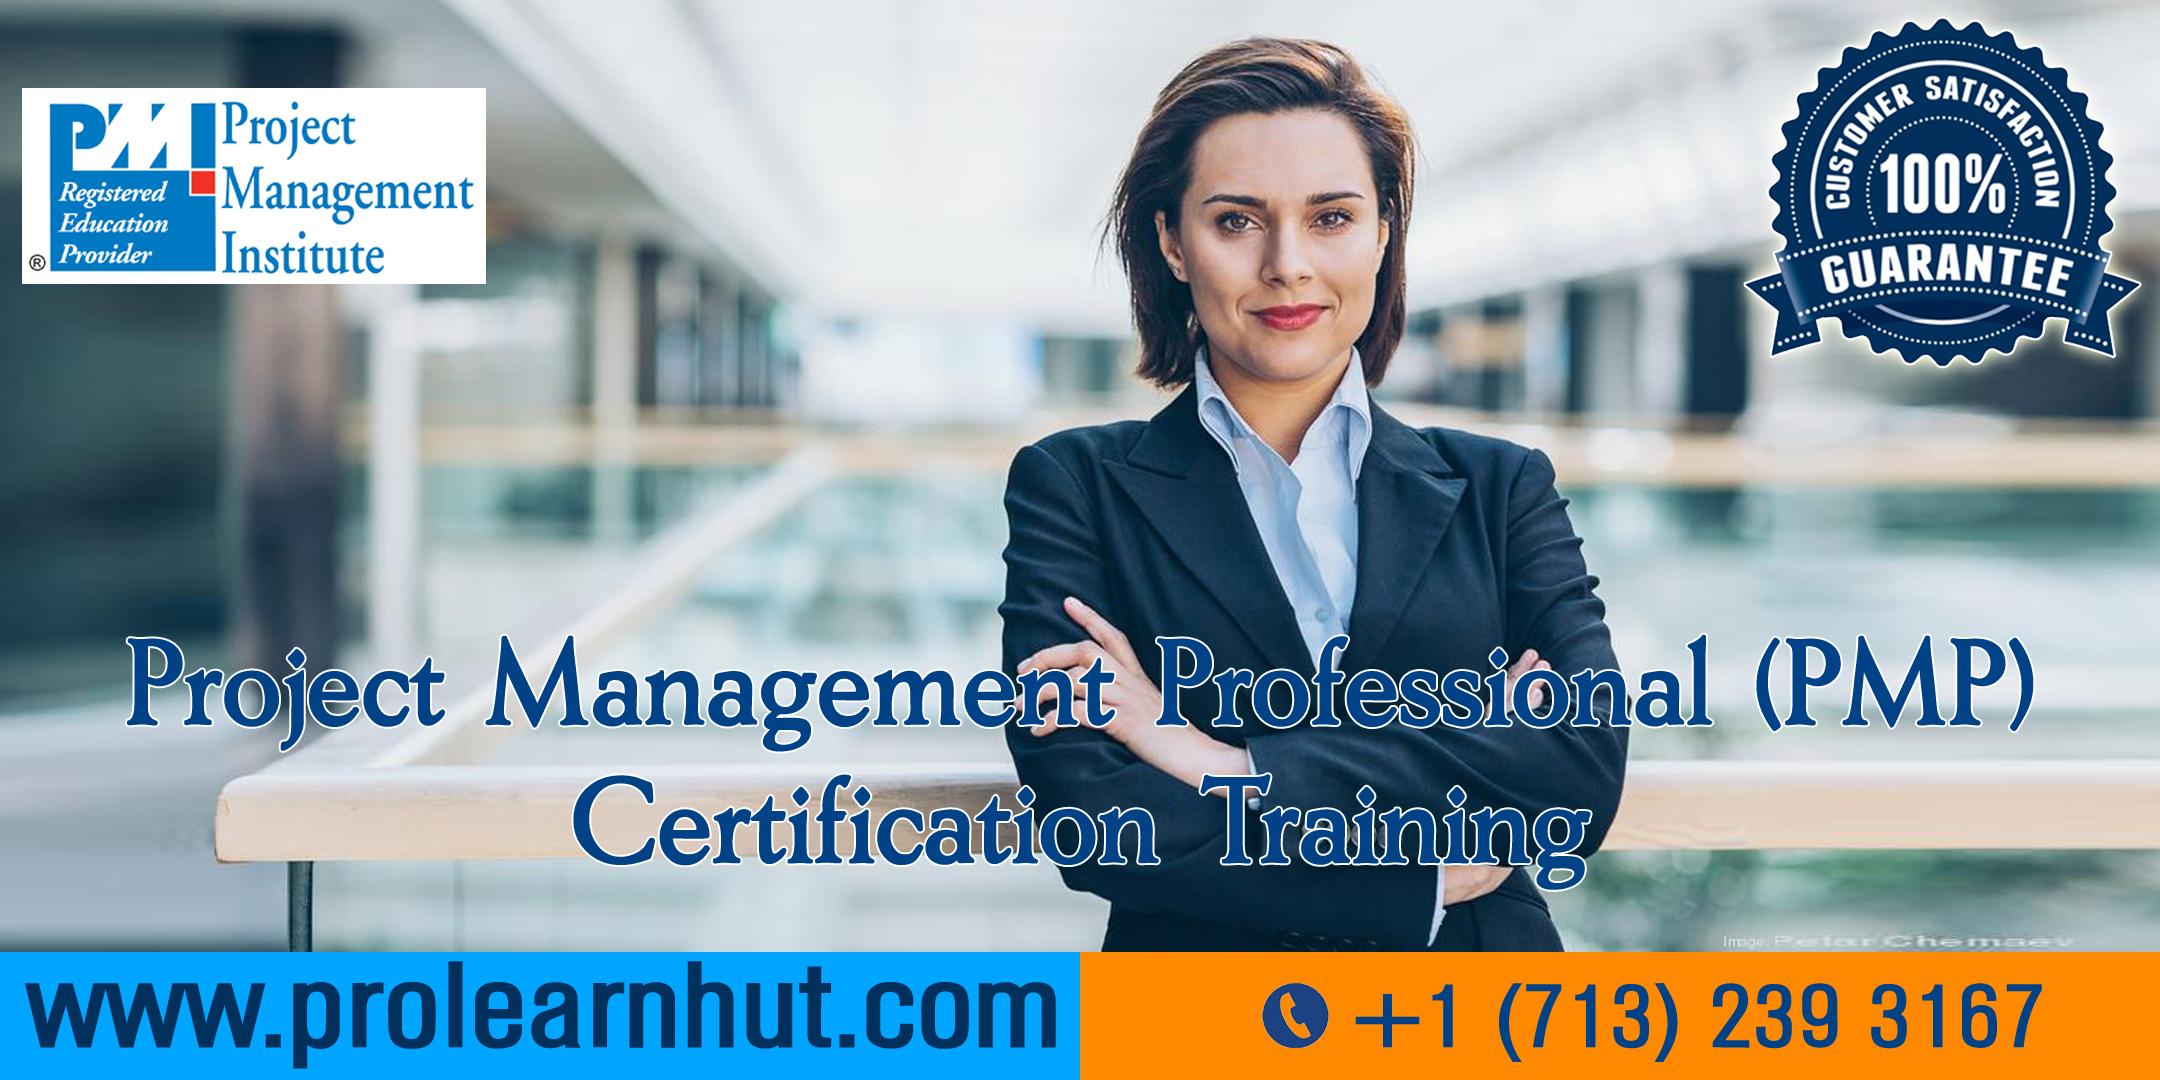 PMP Certification | Project Management Certification| PMP Training in Sunnyvale, CA | ProLearnHut